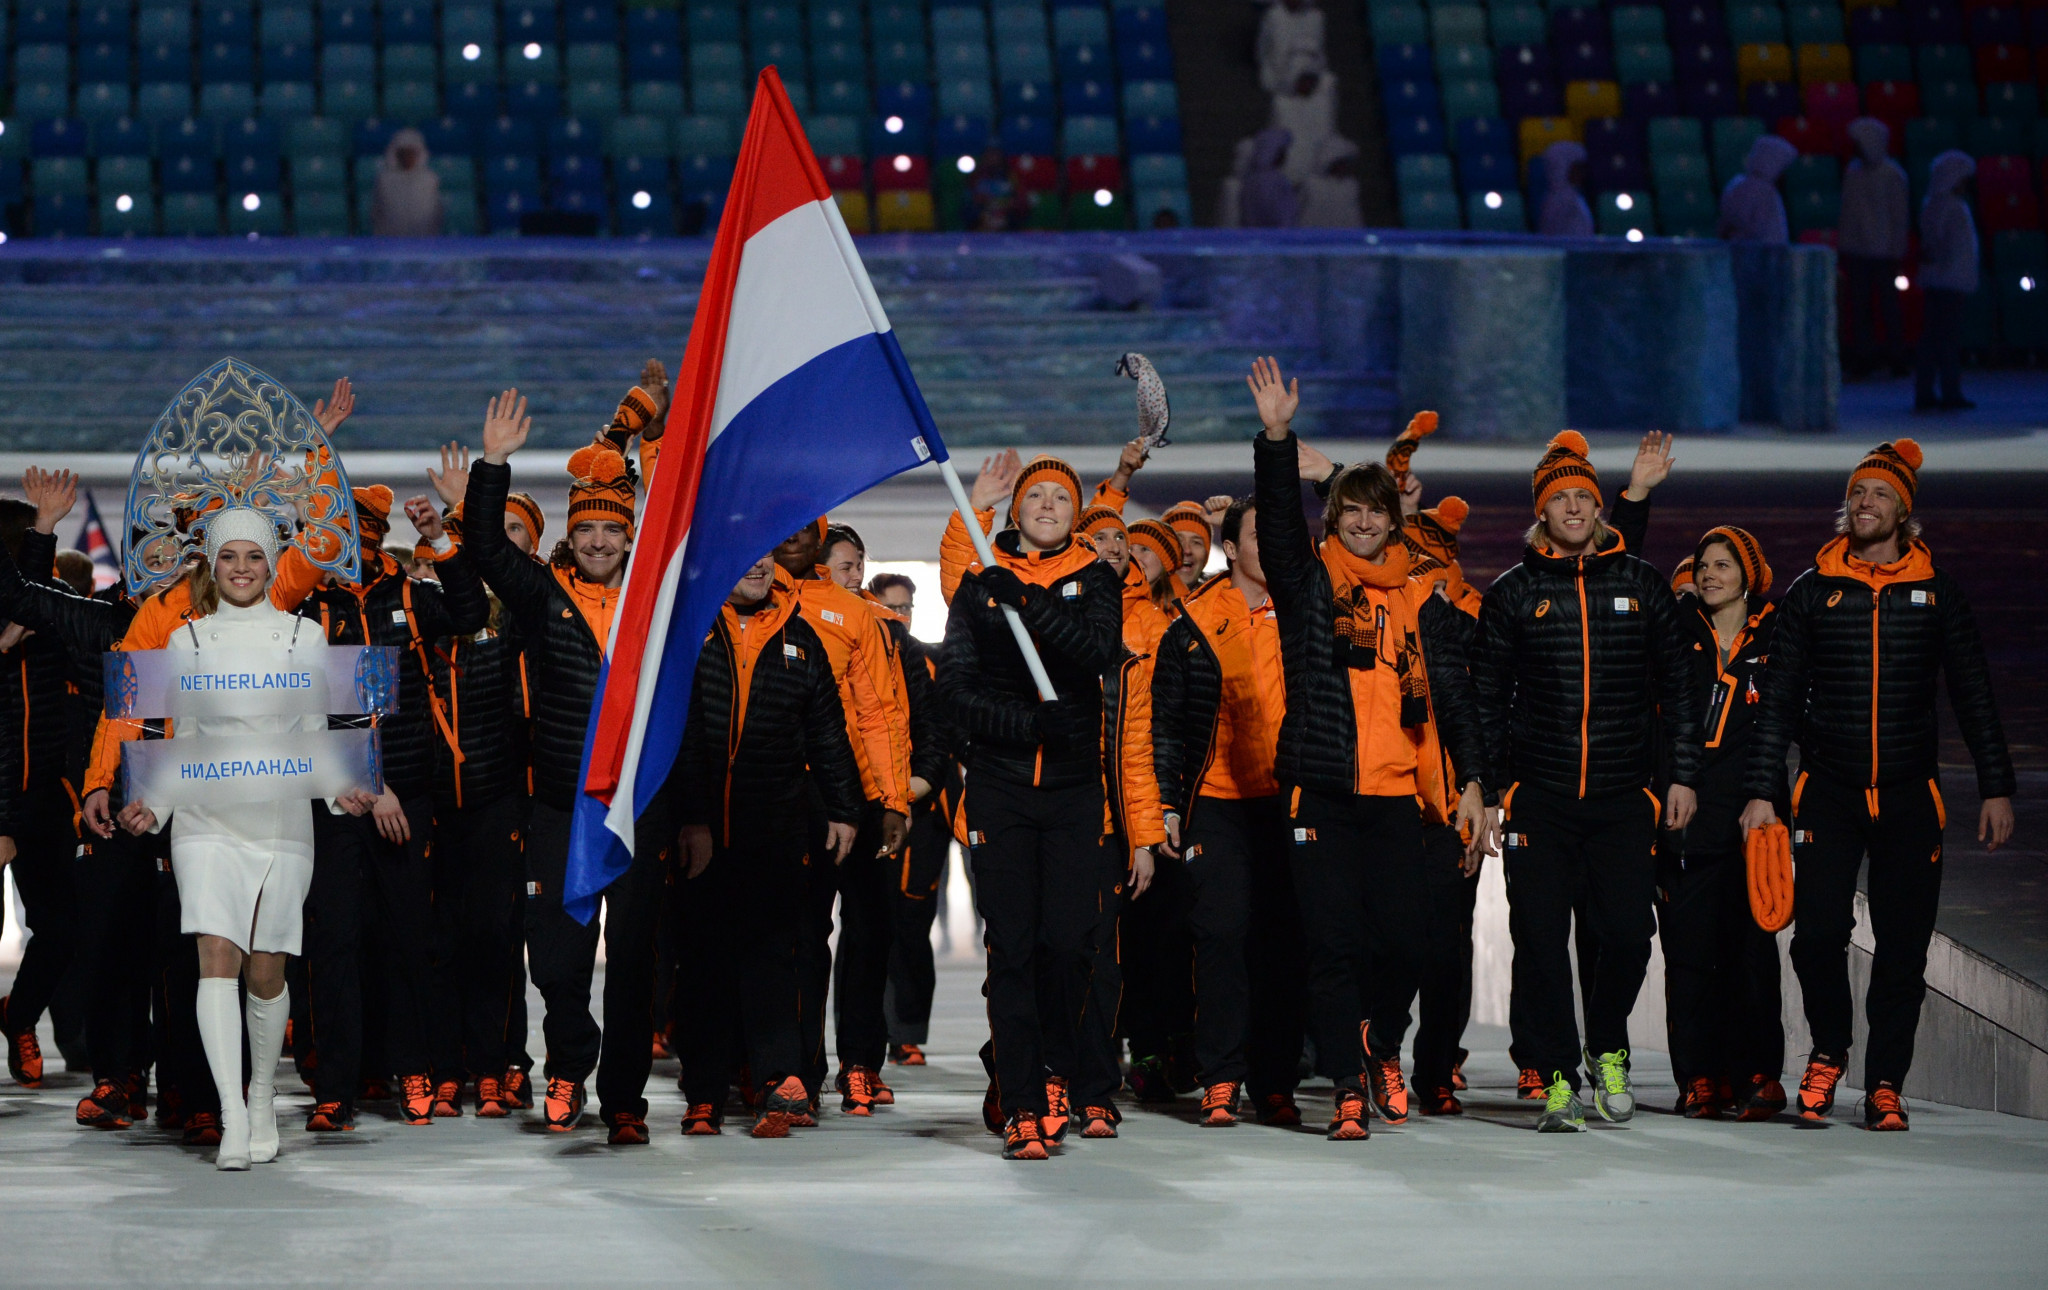 The incident is overshadowing Dutch preparations for Pyeongchang 2018 ©Getty Images